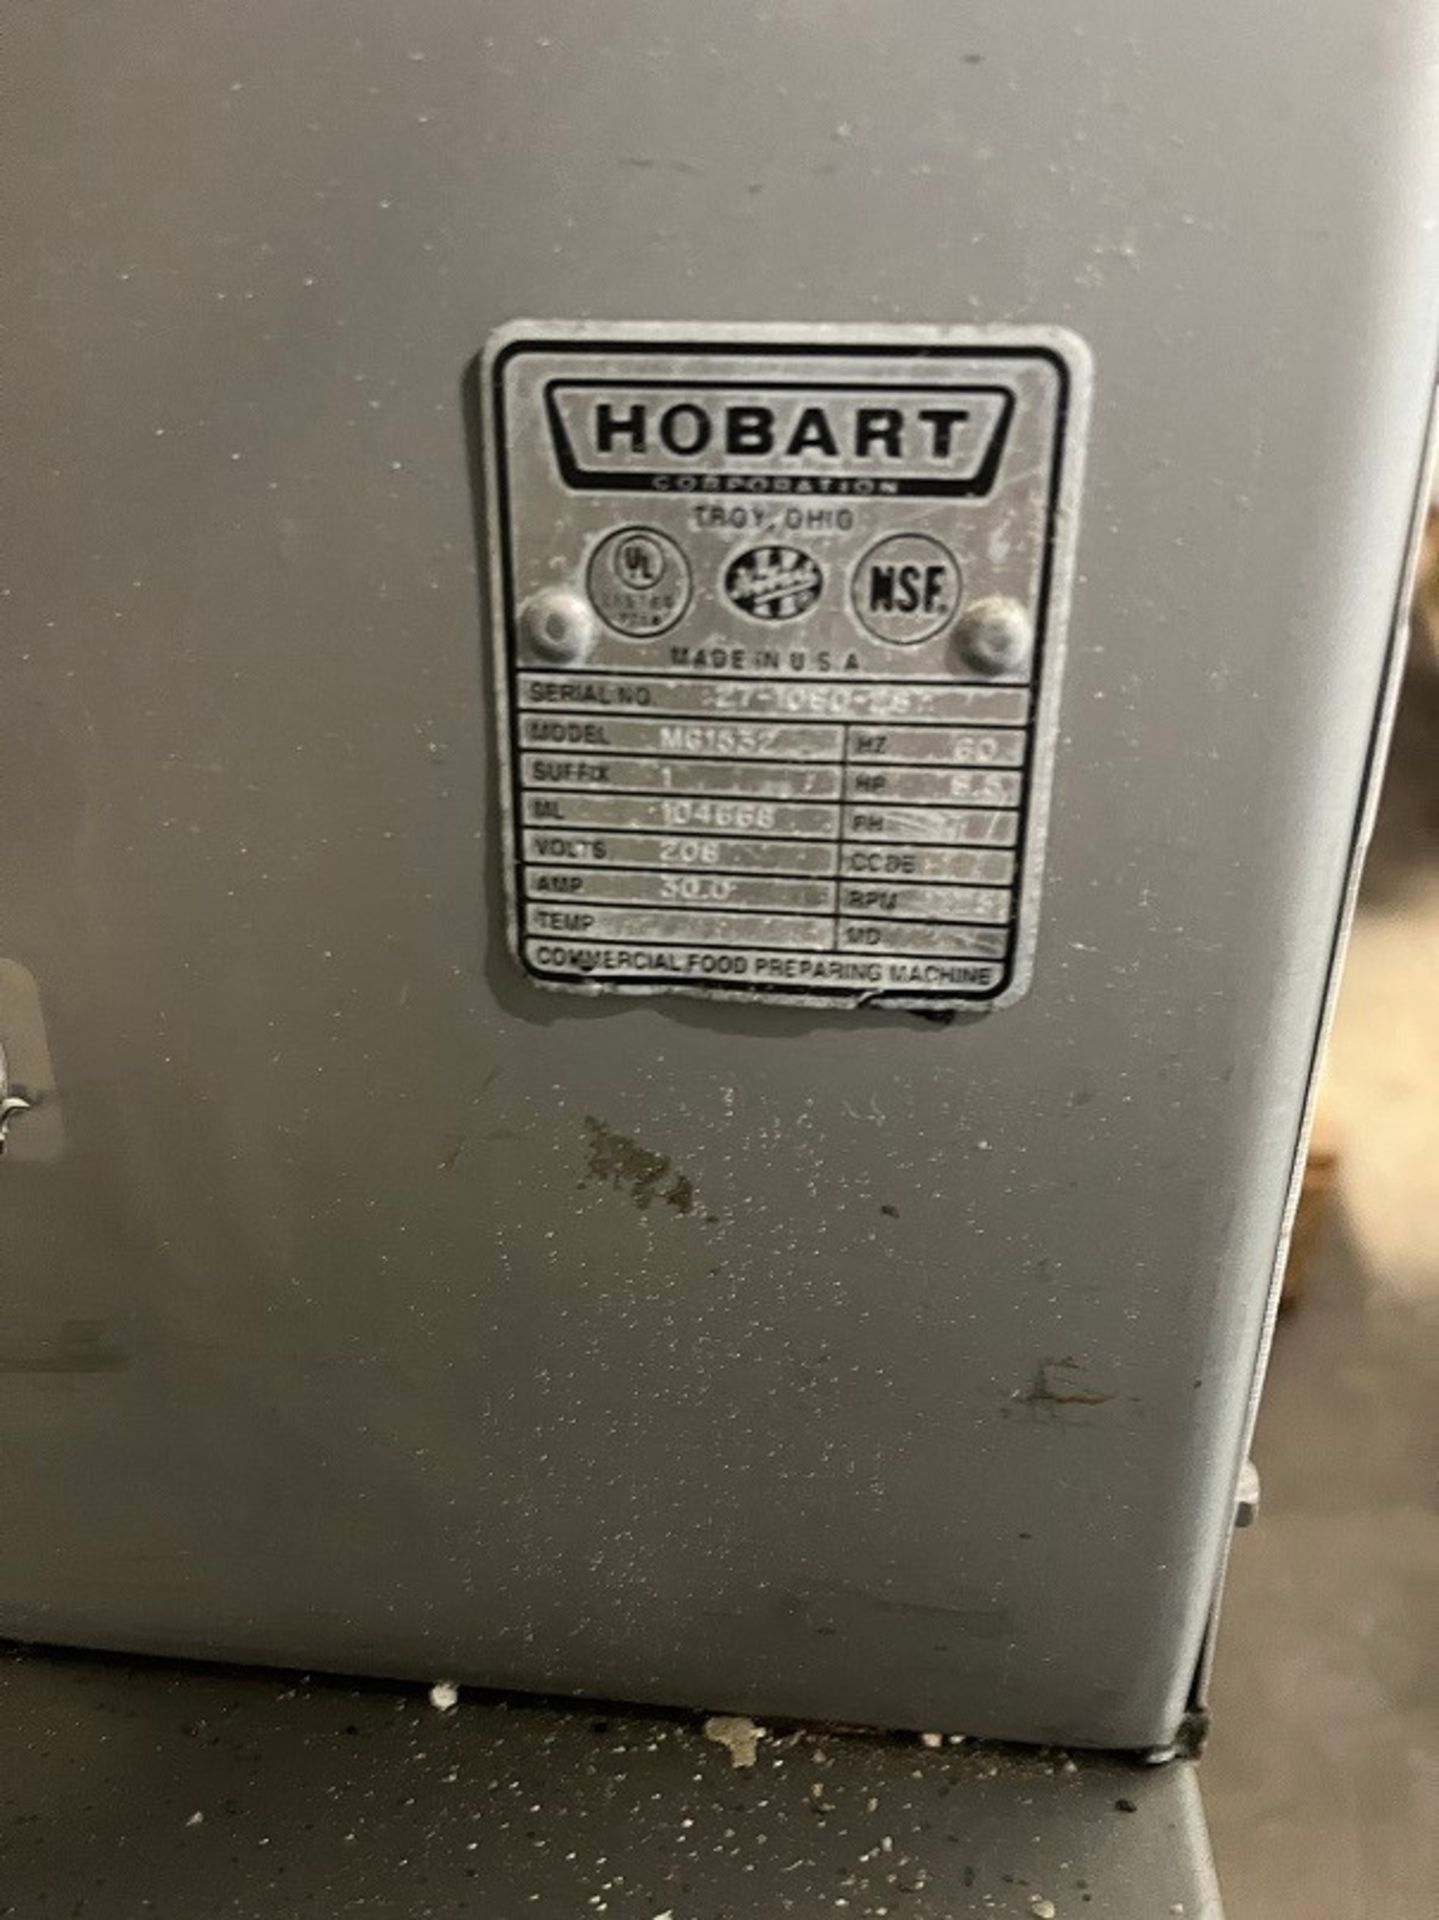 Used Hobart Model MG1532 Meat Grinder. 150 Pound Hopper Capacity. Double wall construction. 7.5 Hp - Image 4 of 6